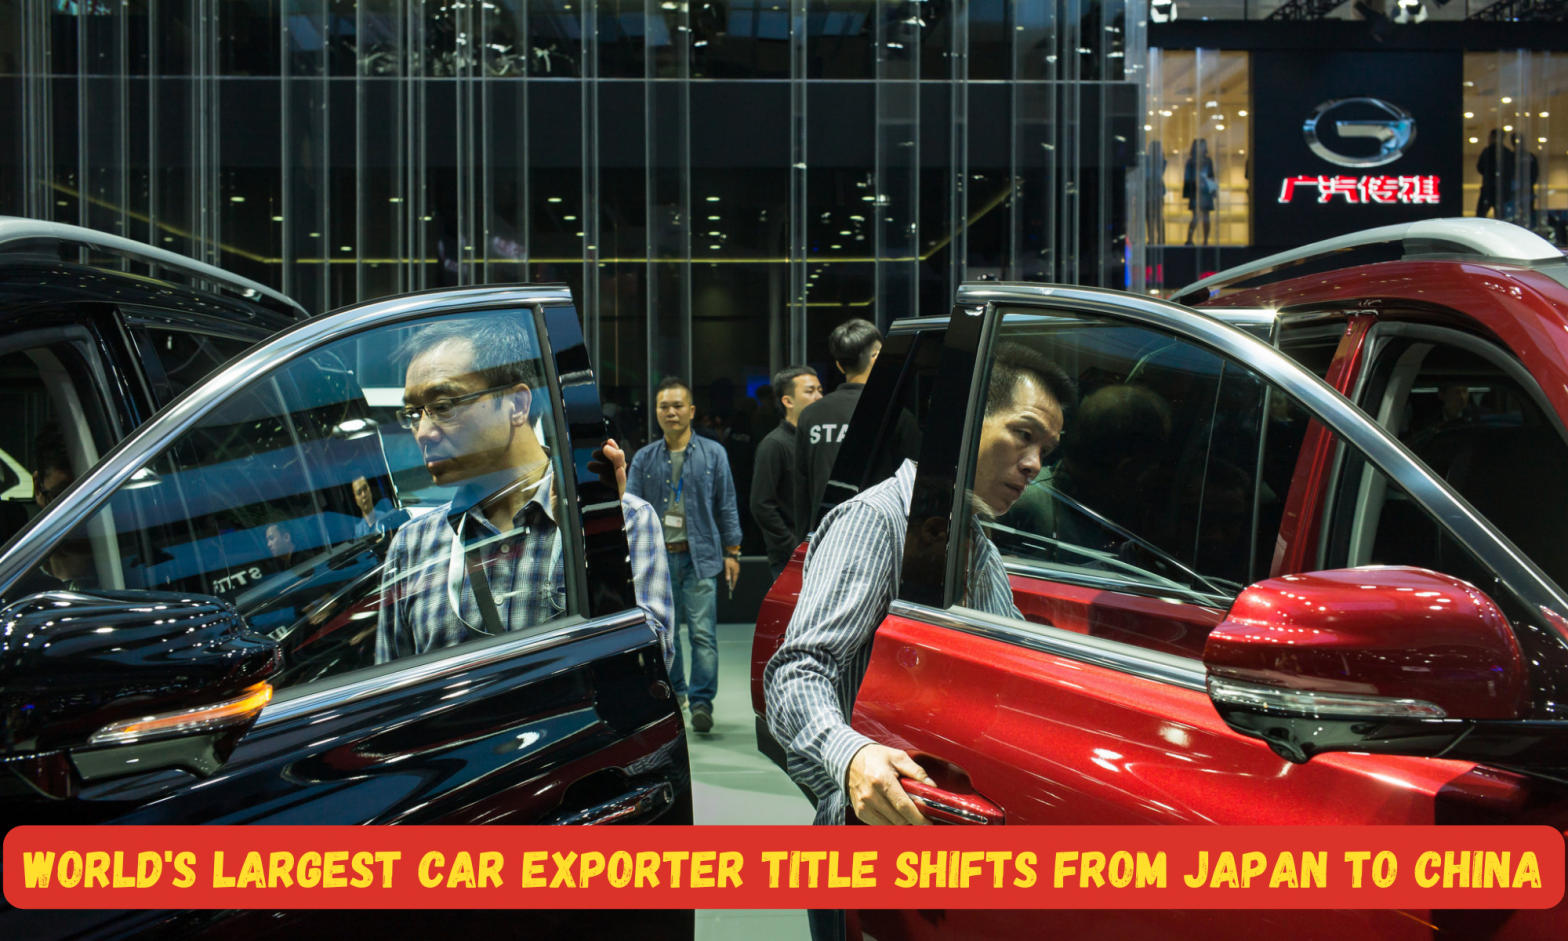 World's Largest Car Exporter Title Shifts from Japan to China